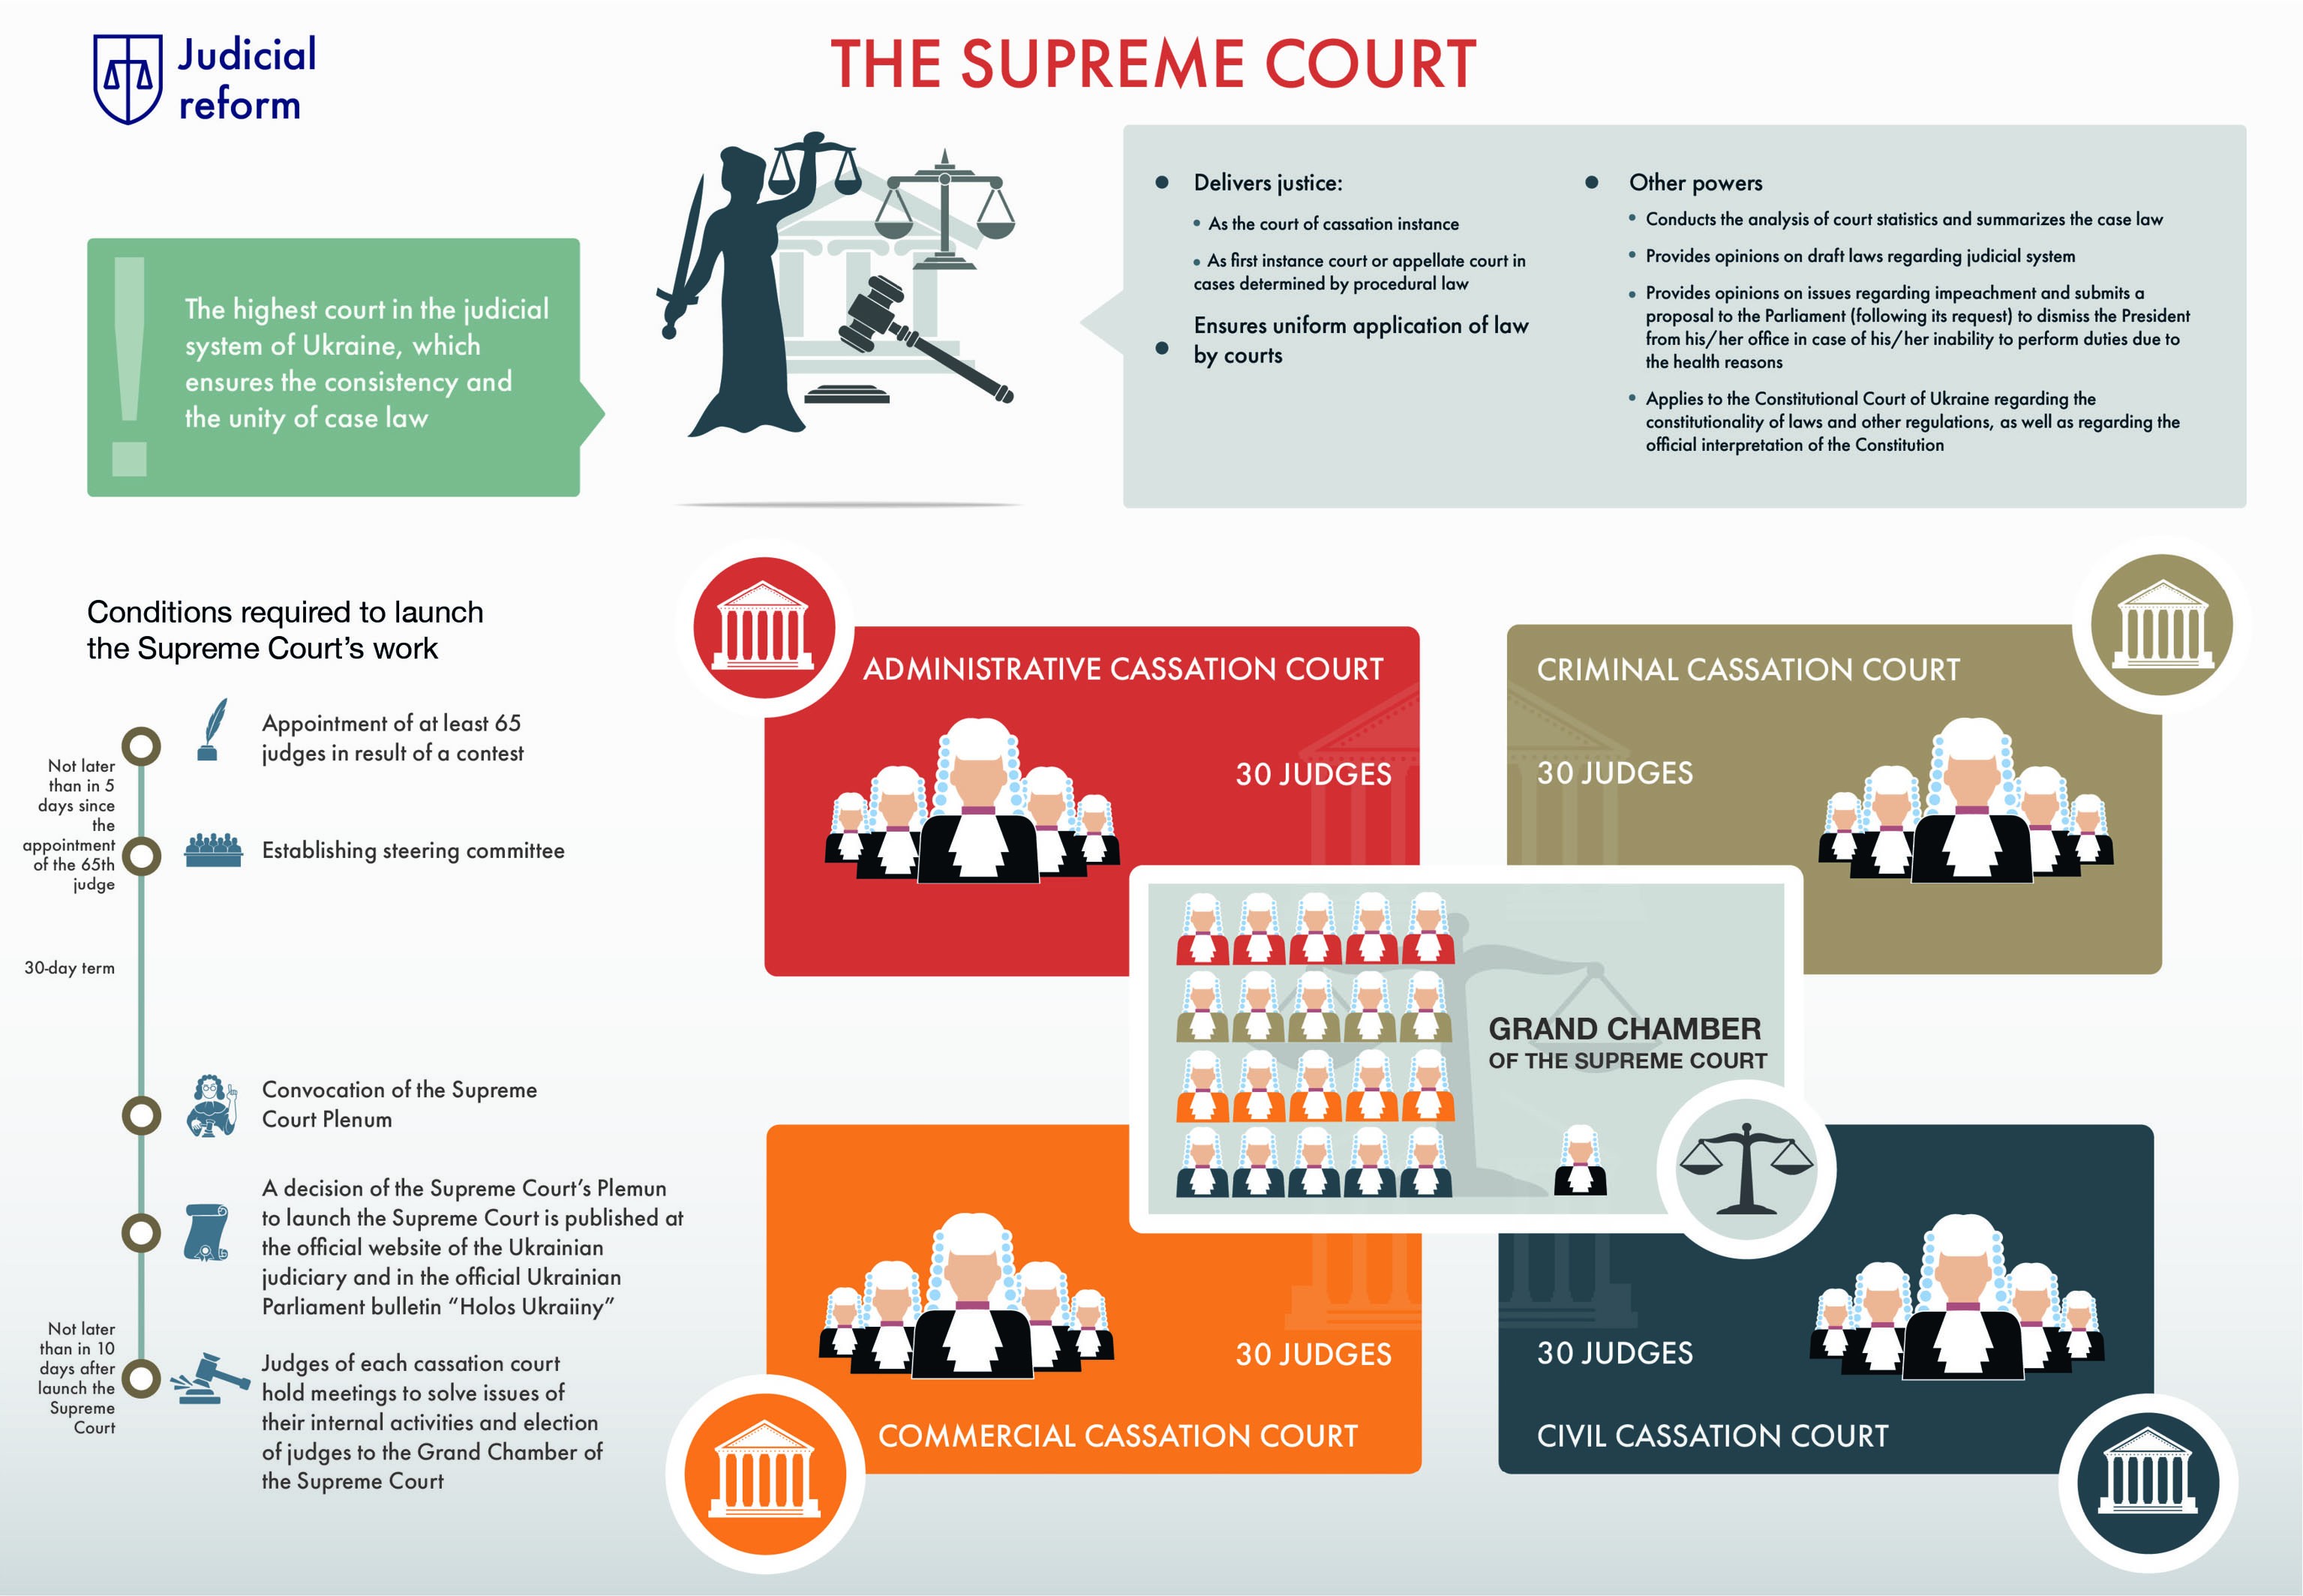 When fully appointed, Ukraine’s Supreme Court envisions 200 judges who are the ultimate law of the land through its grand chamber. The four cassation courts act as higher appeals courts to lower court rulings. (Presdientail Administration)